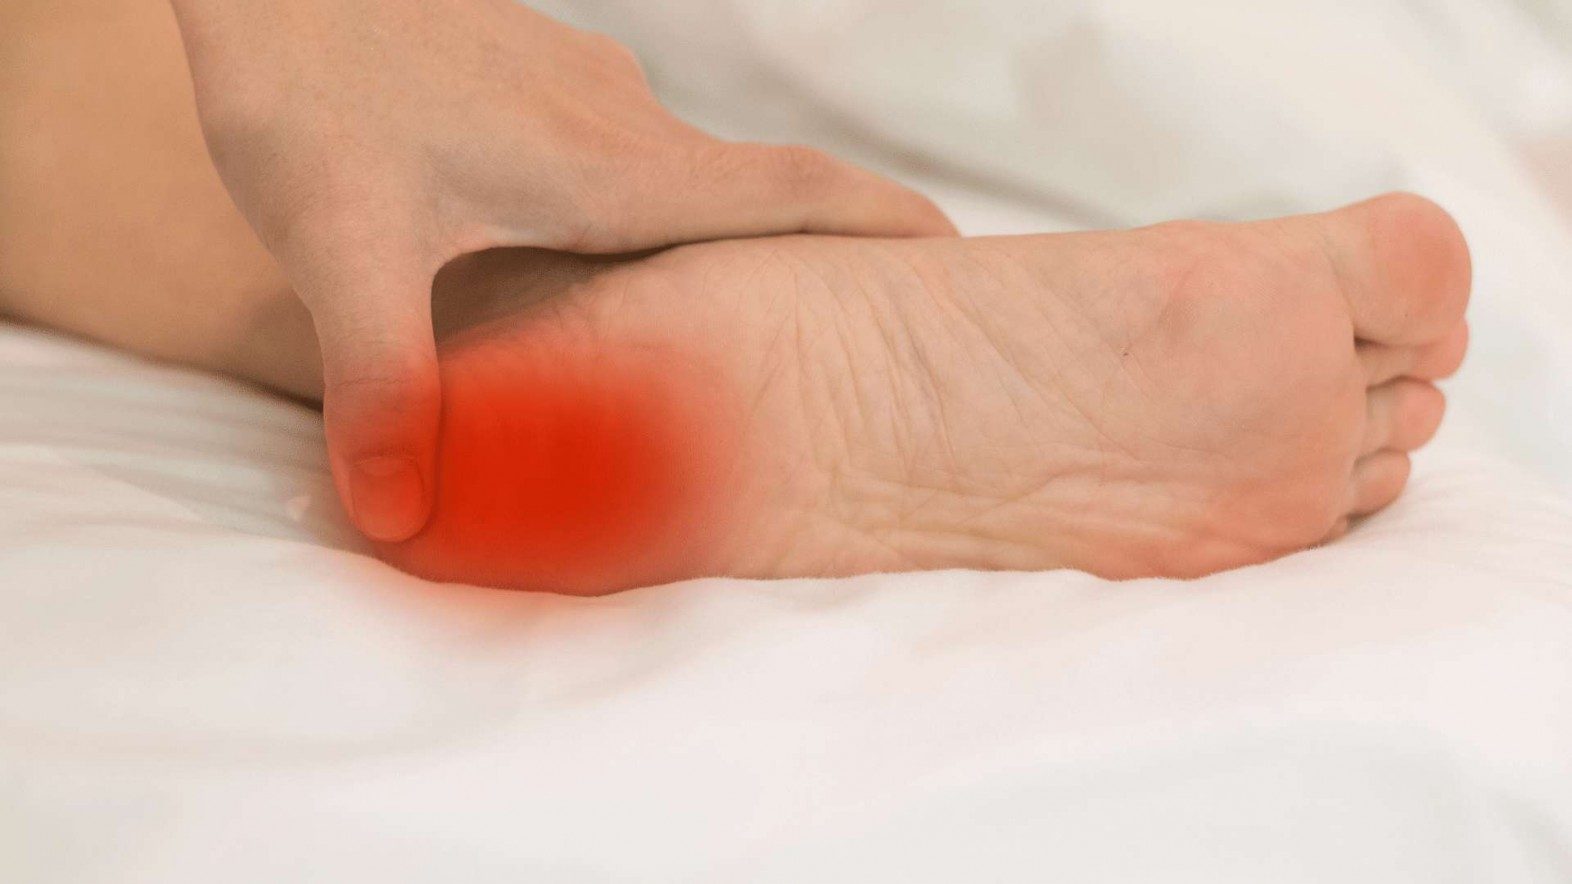 A hand holding their foot in pain from plantar fasciitis, with a red pain locator on the heel